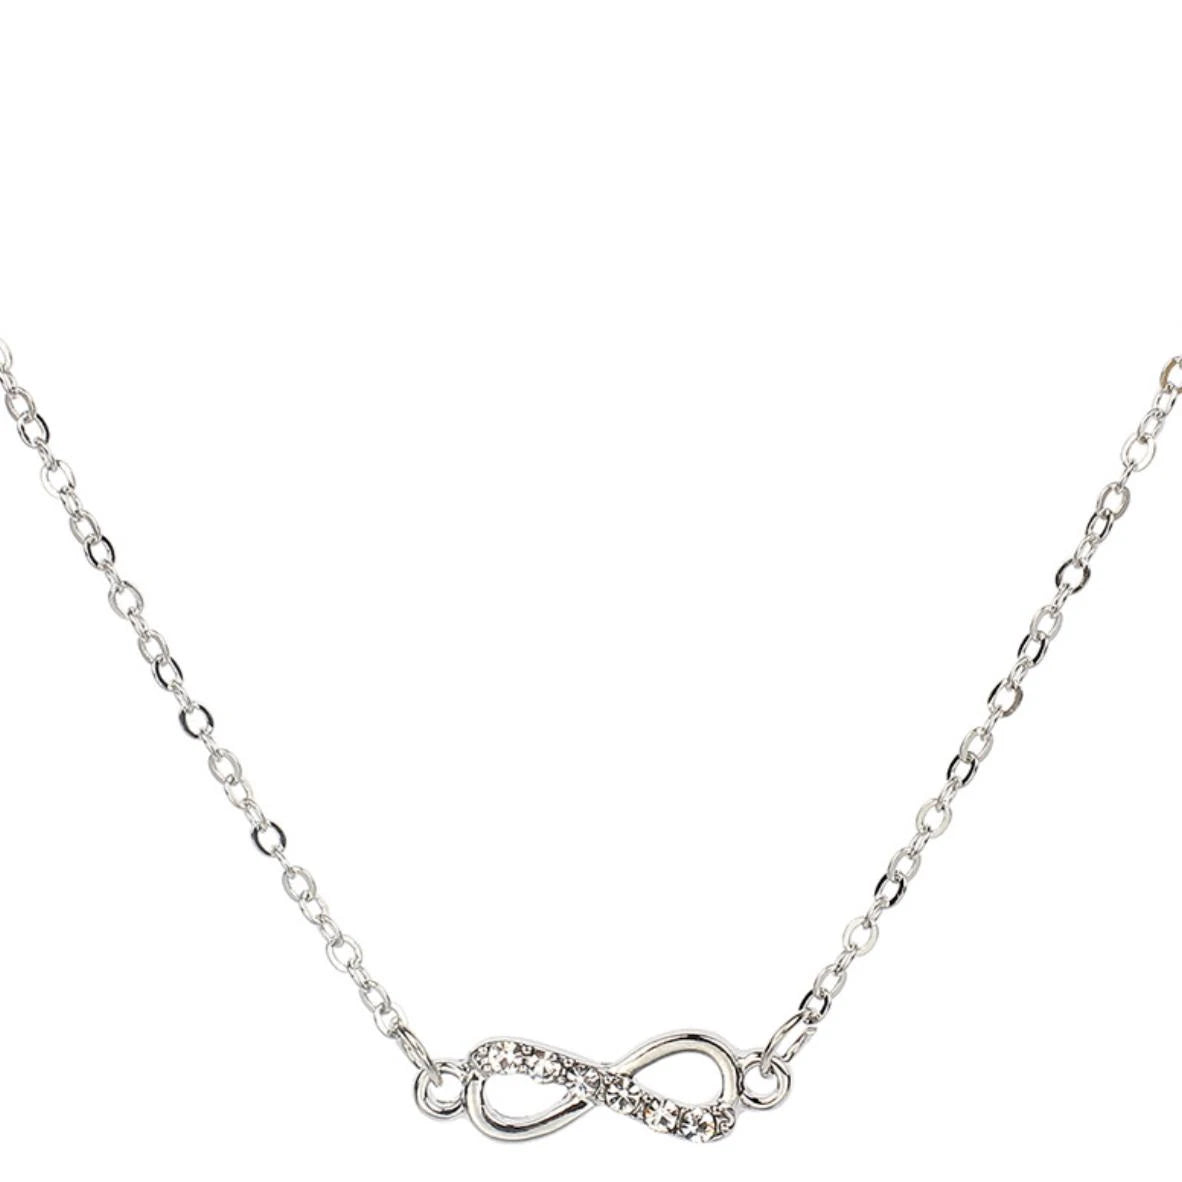 Collier argent infini strass 